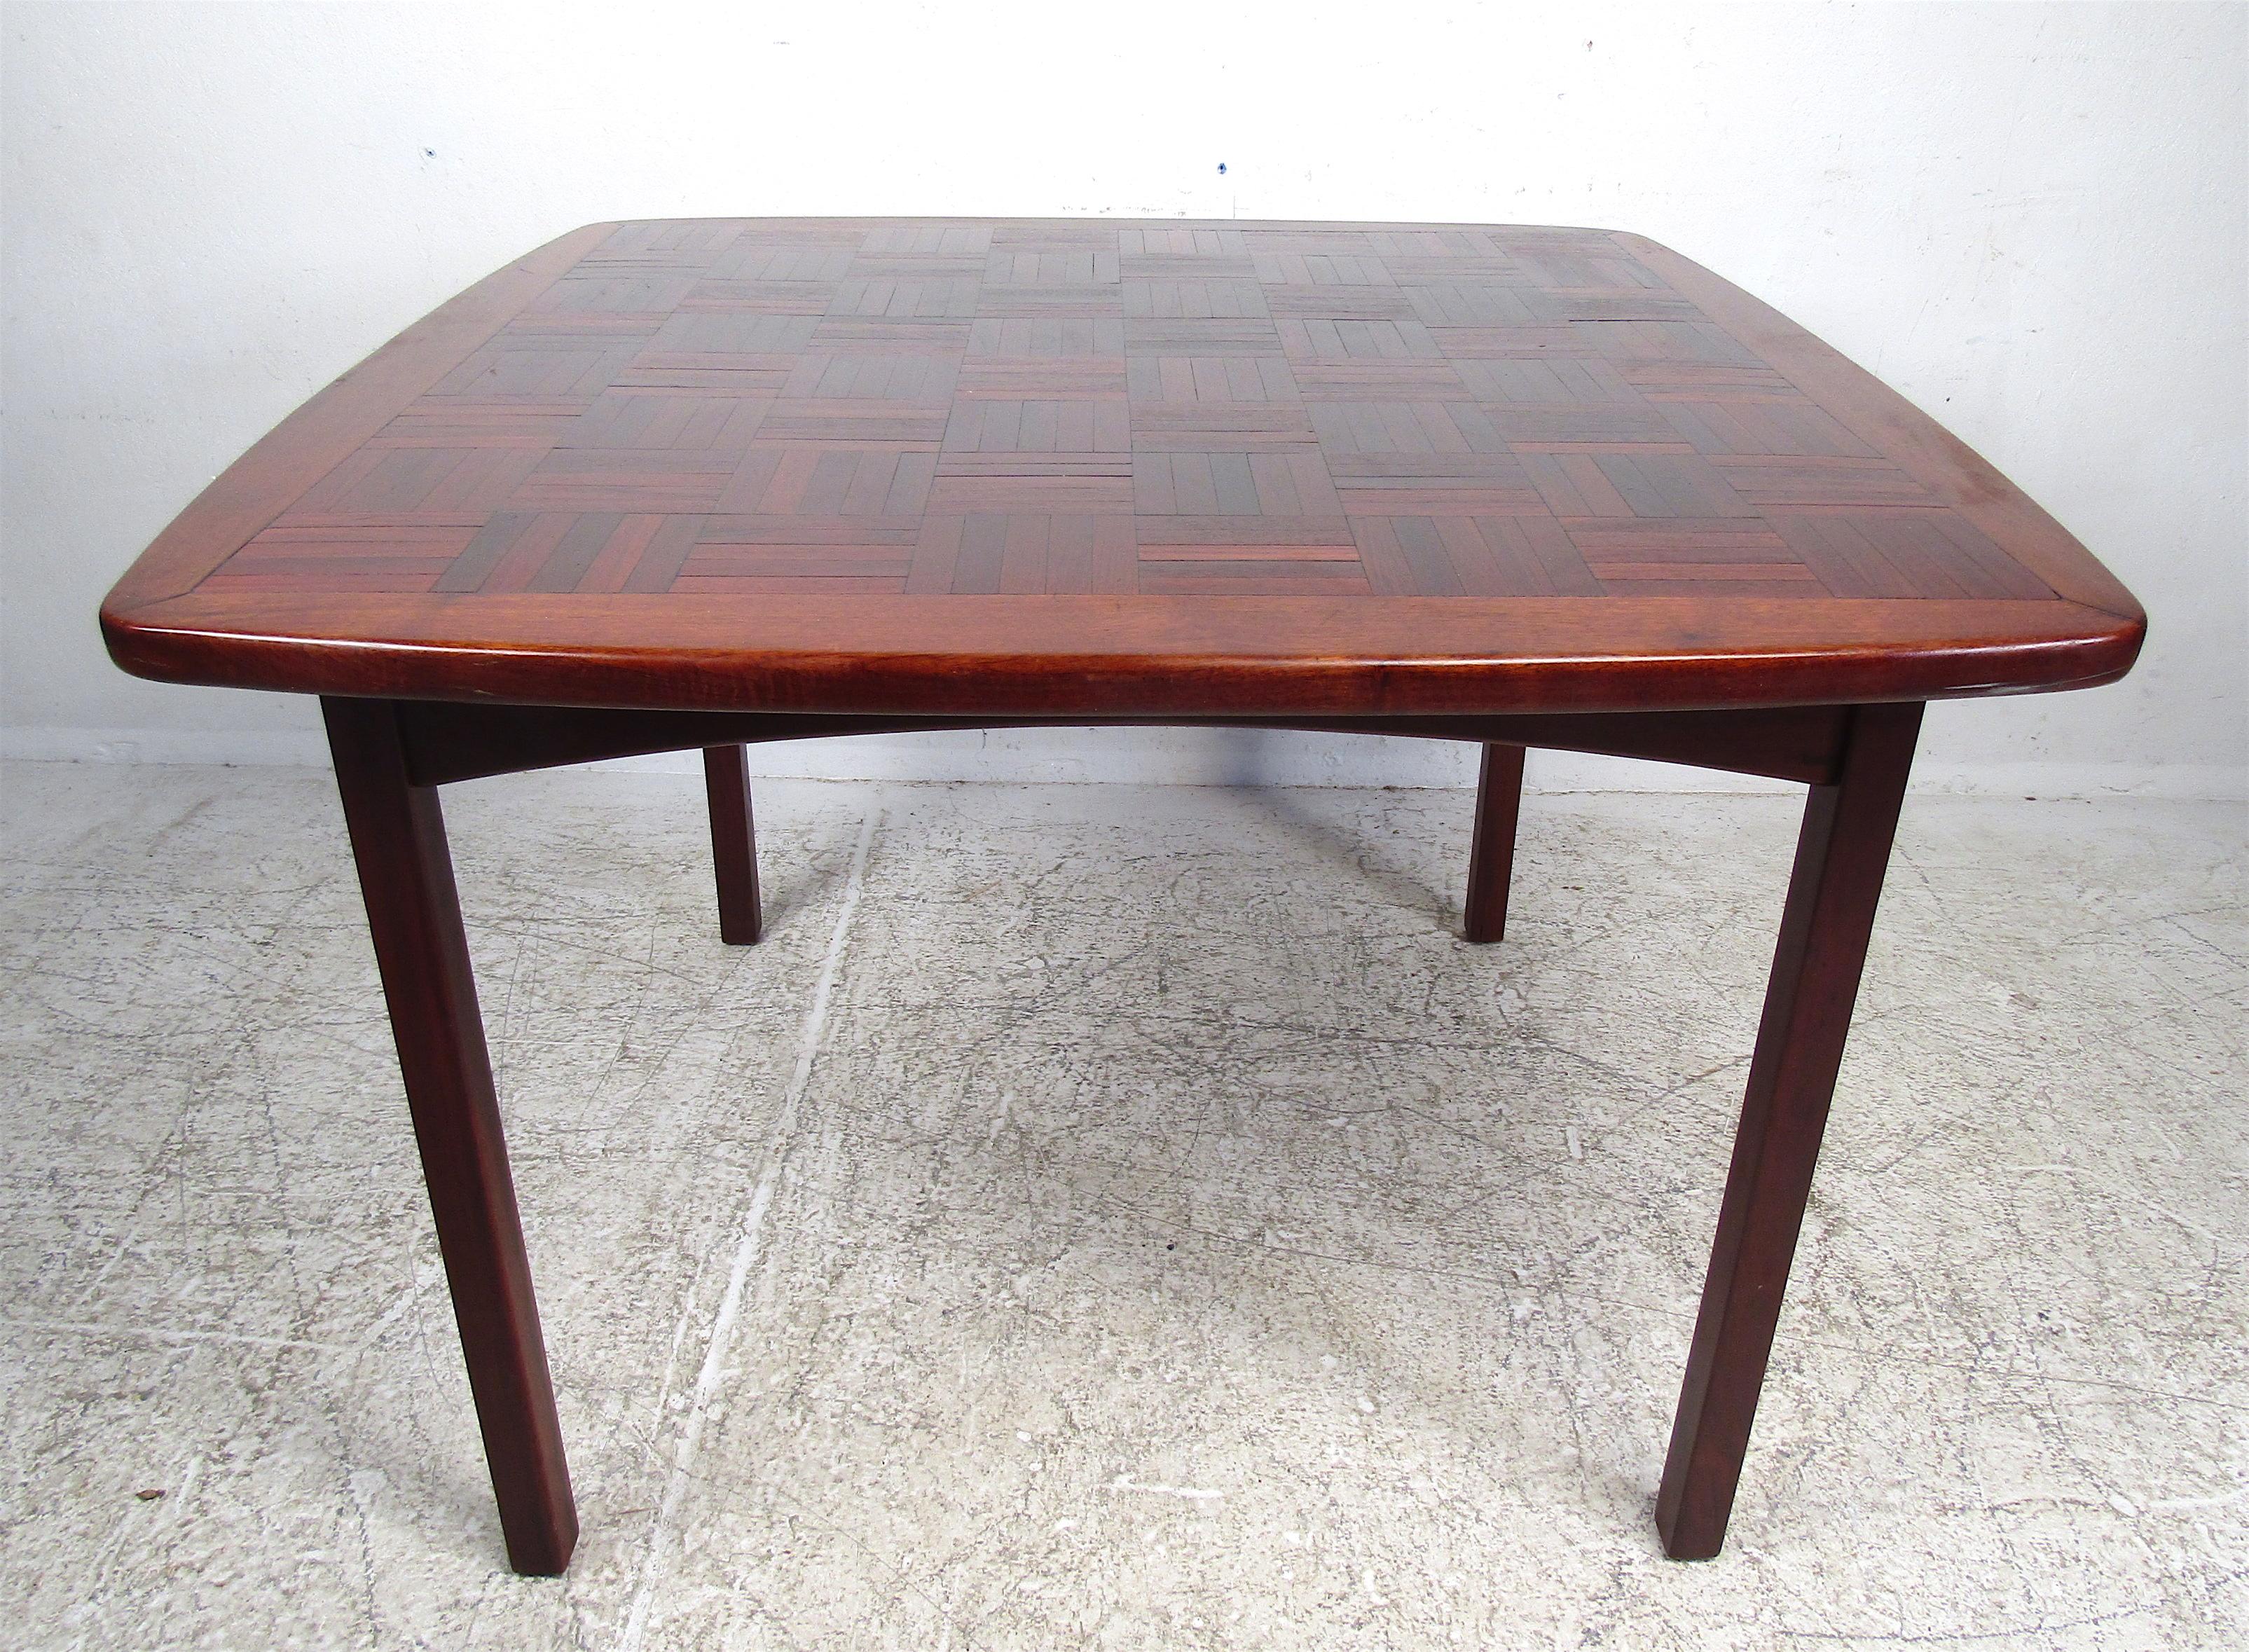 This stunning vintage modern rosewood kitchen table features an unusual mosaic top. A beautiful two-tone design with long legs and rounded edges. This is an original 1960s piece with the date stamped April 21, 1966, underneath. This versatile and